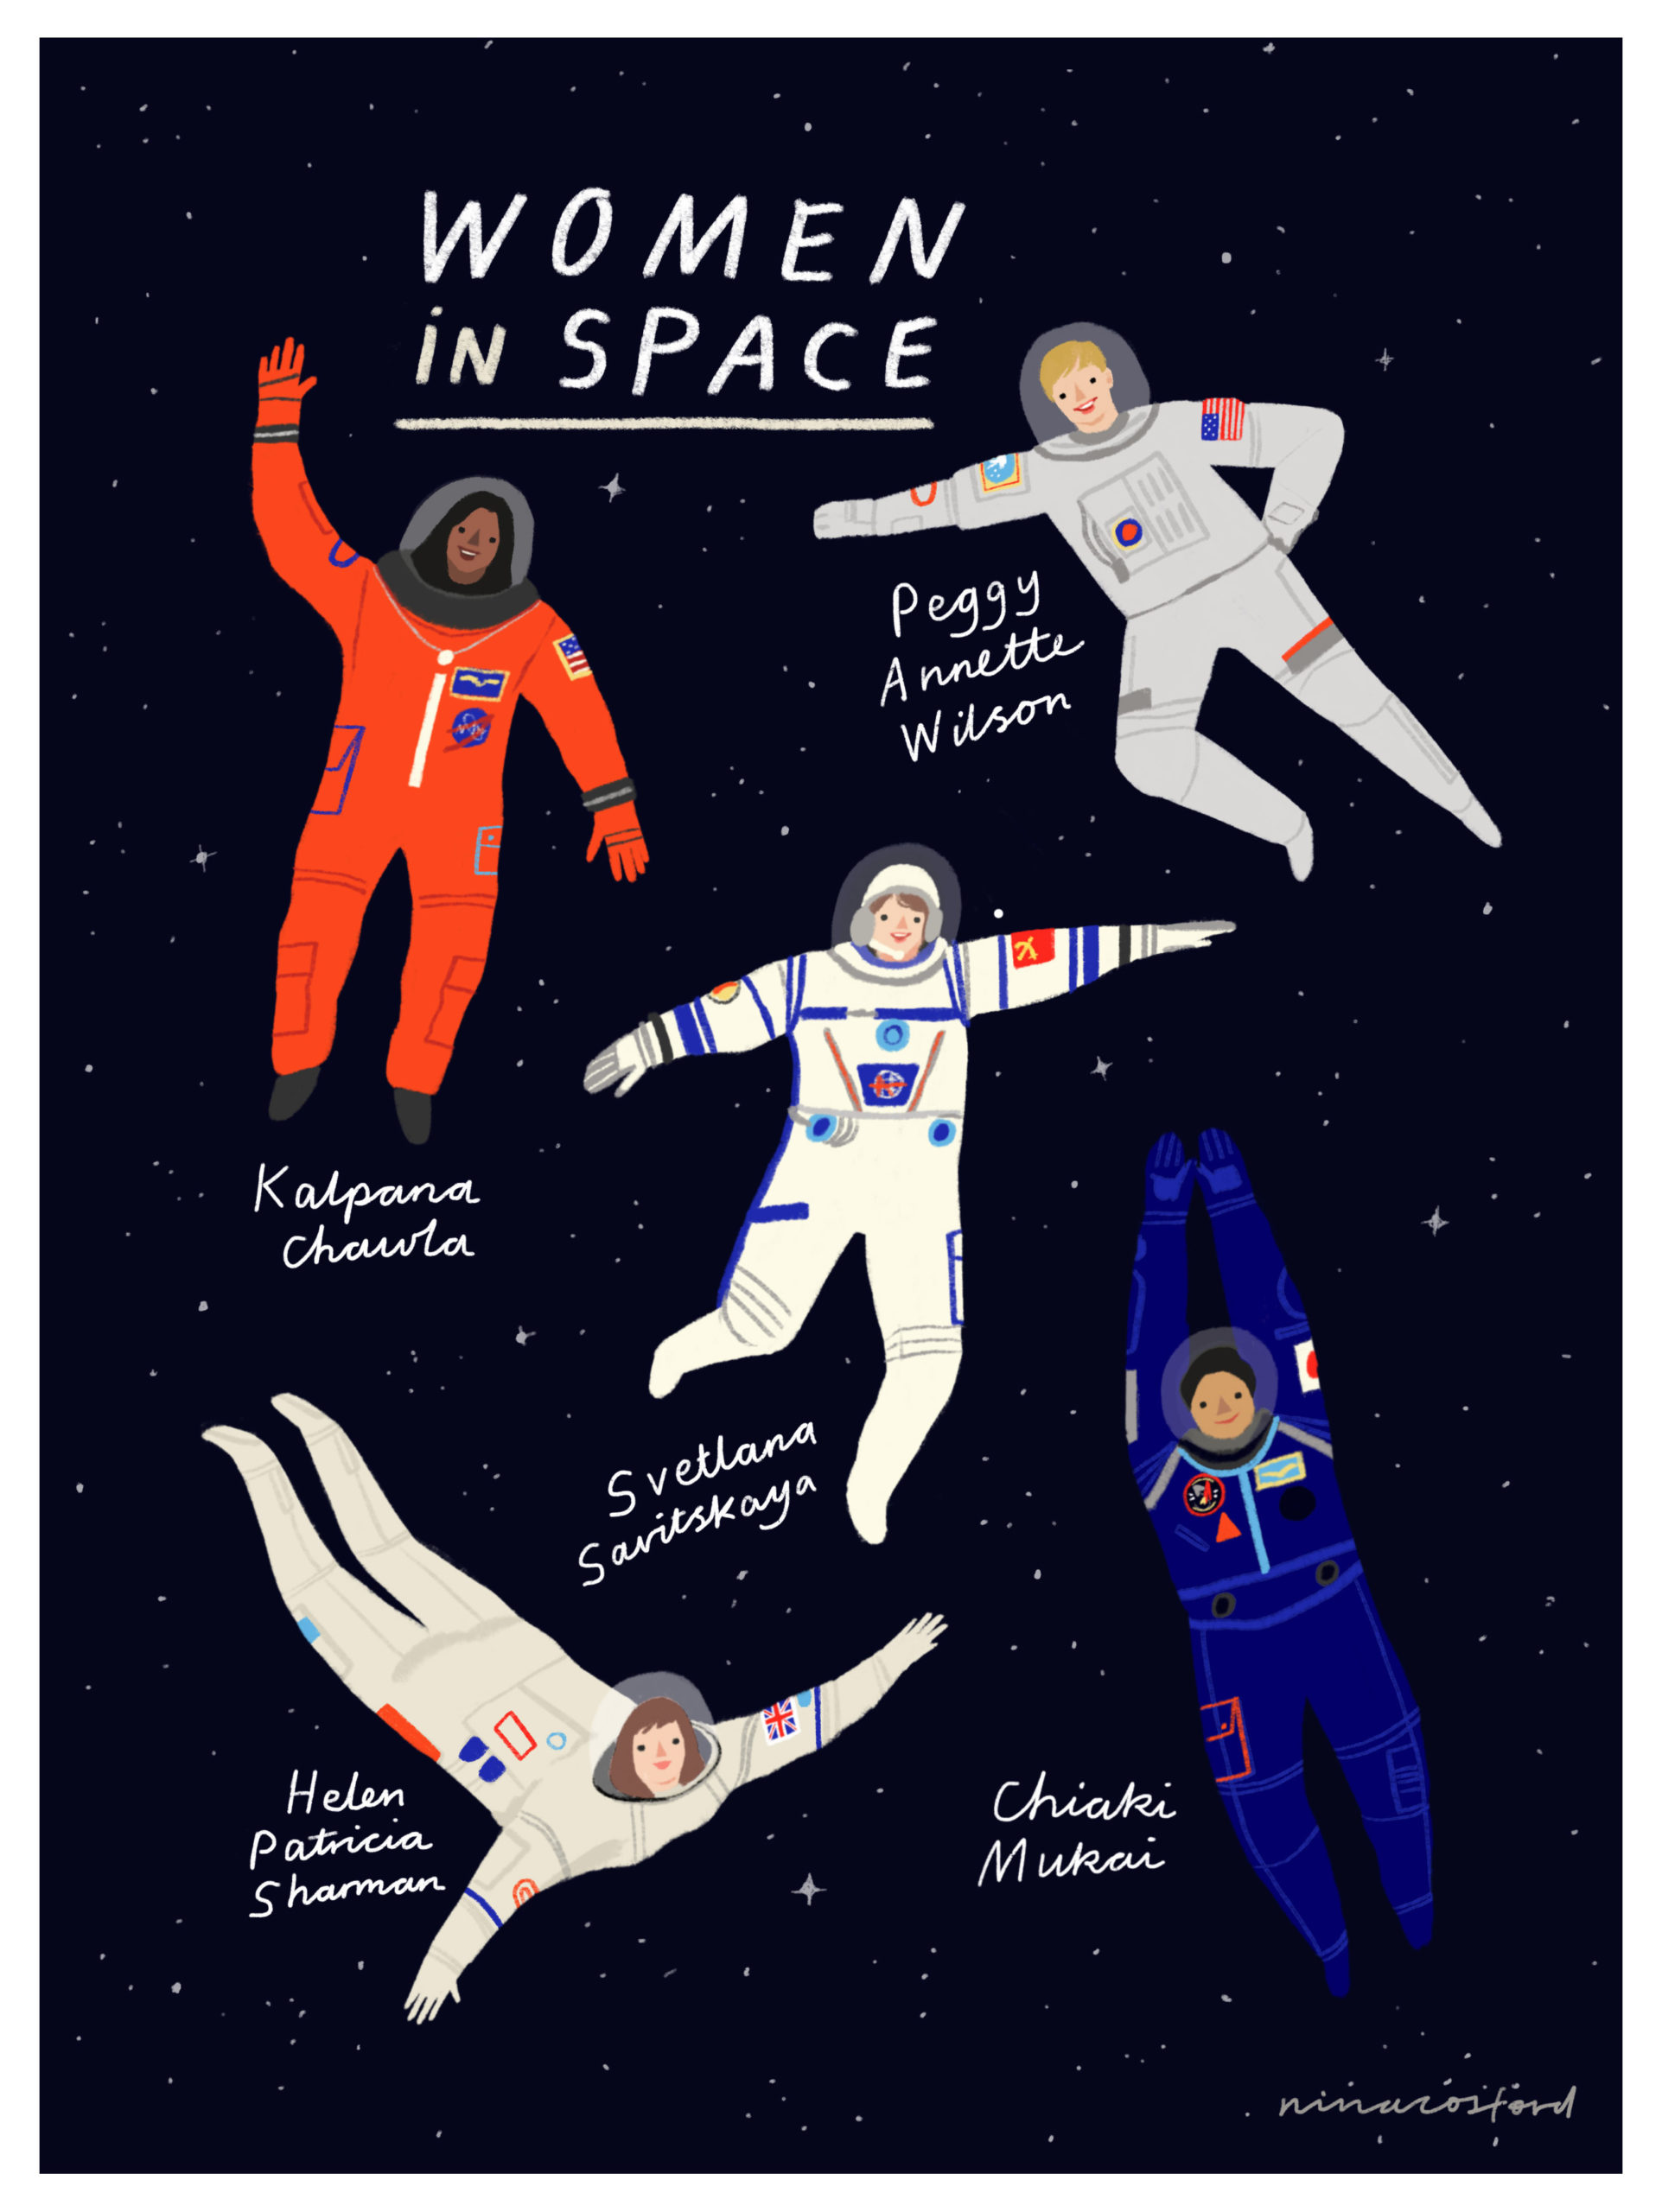 Nina Cosford Illustration - women in space, google arts and culture